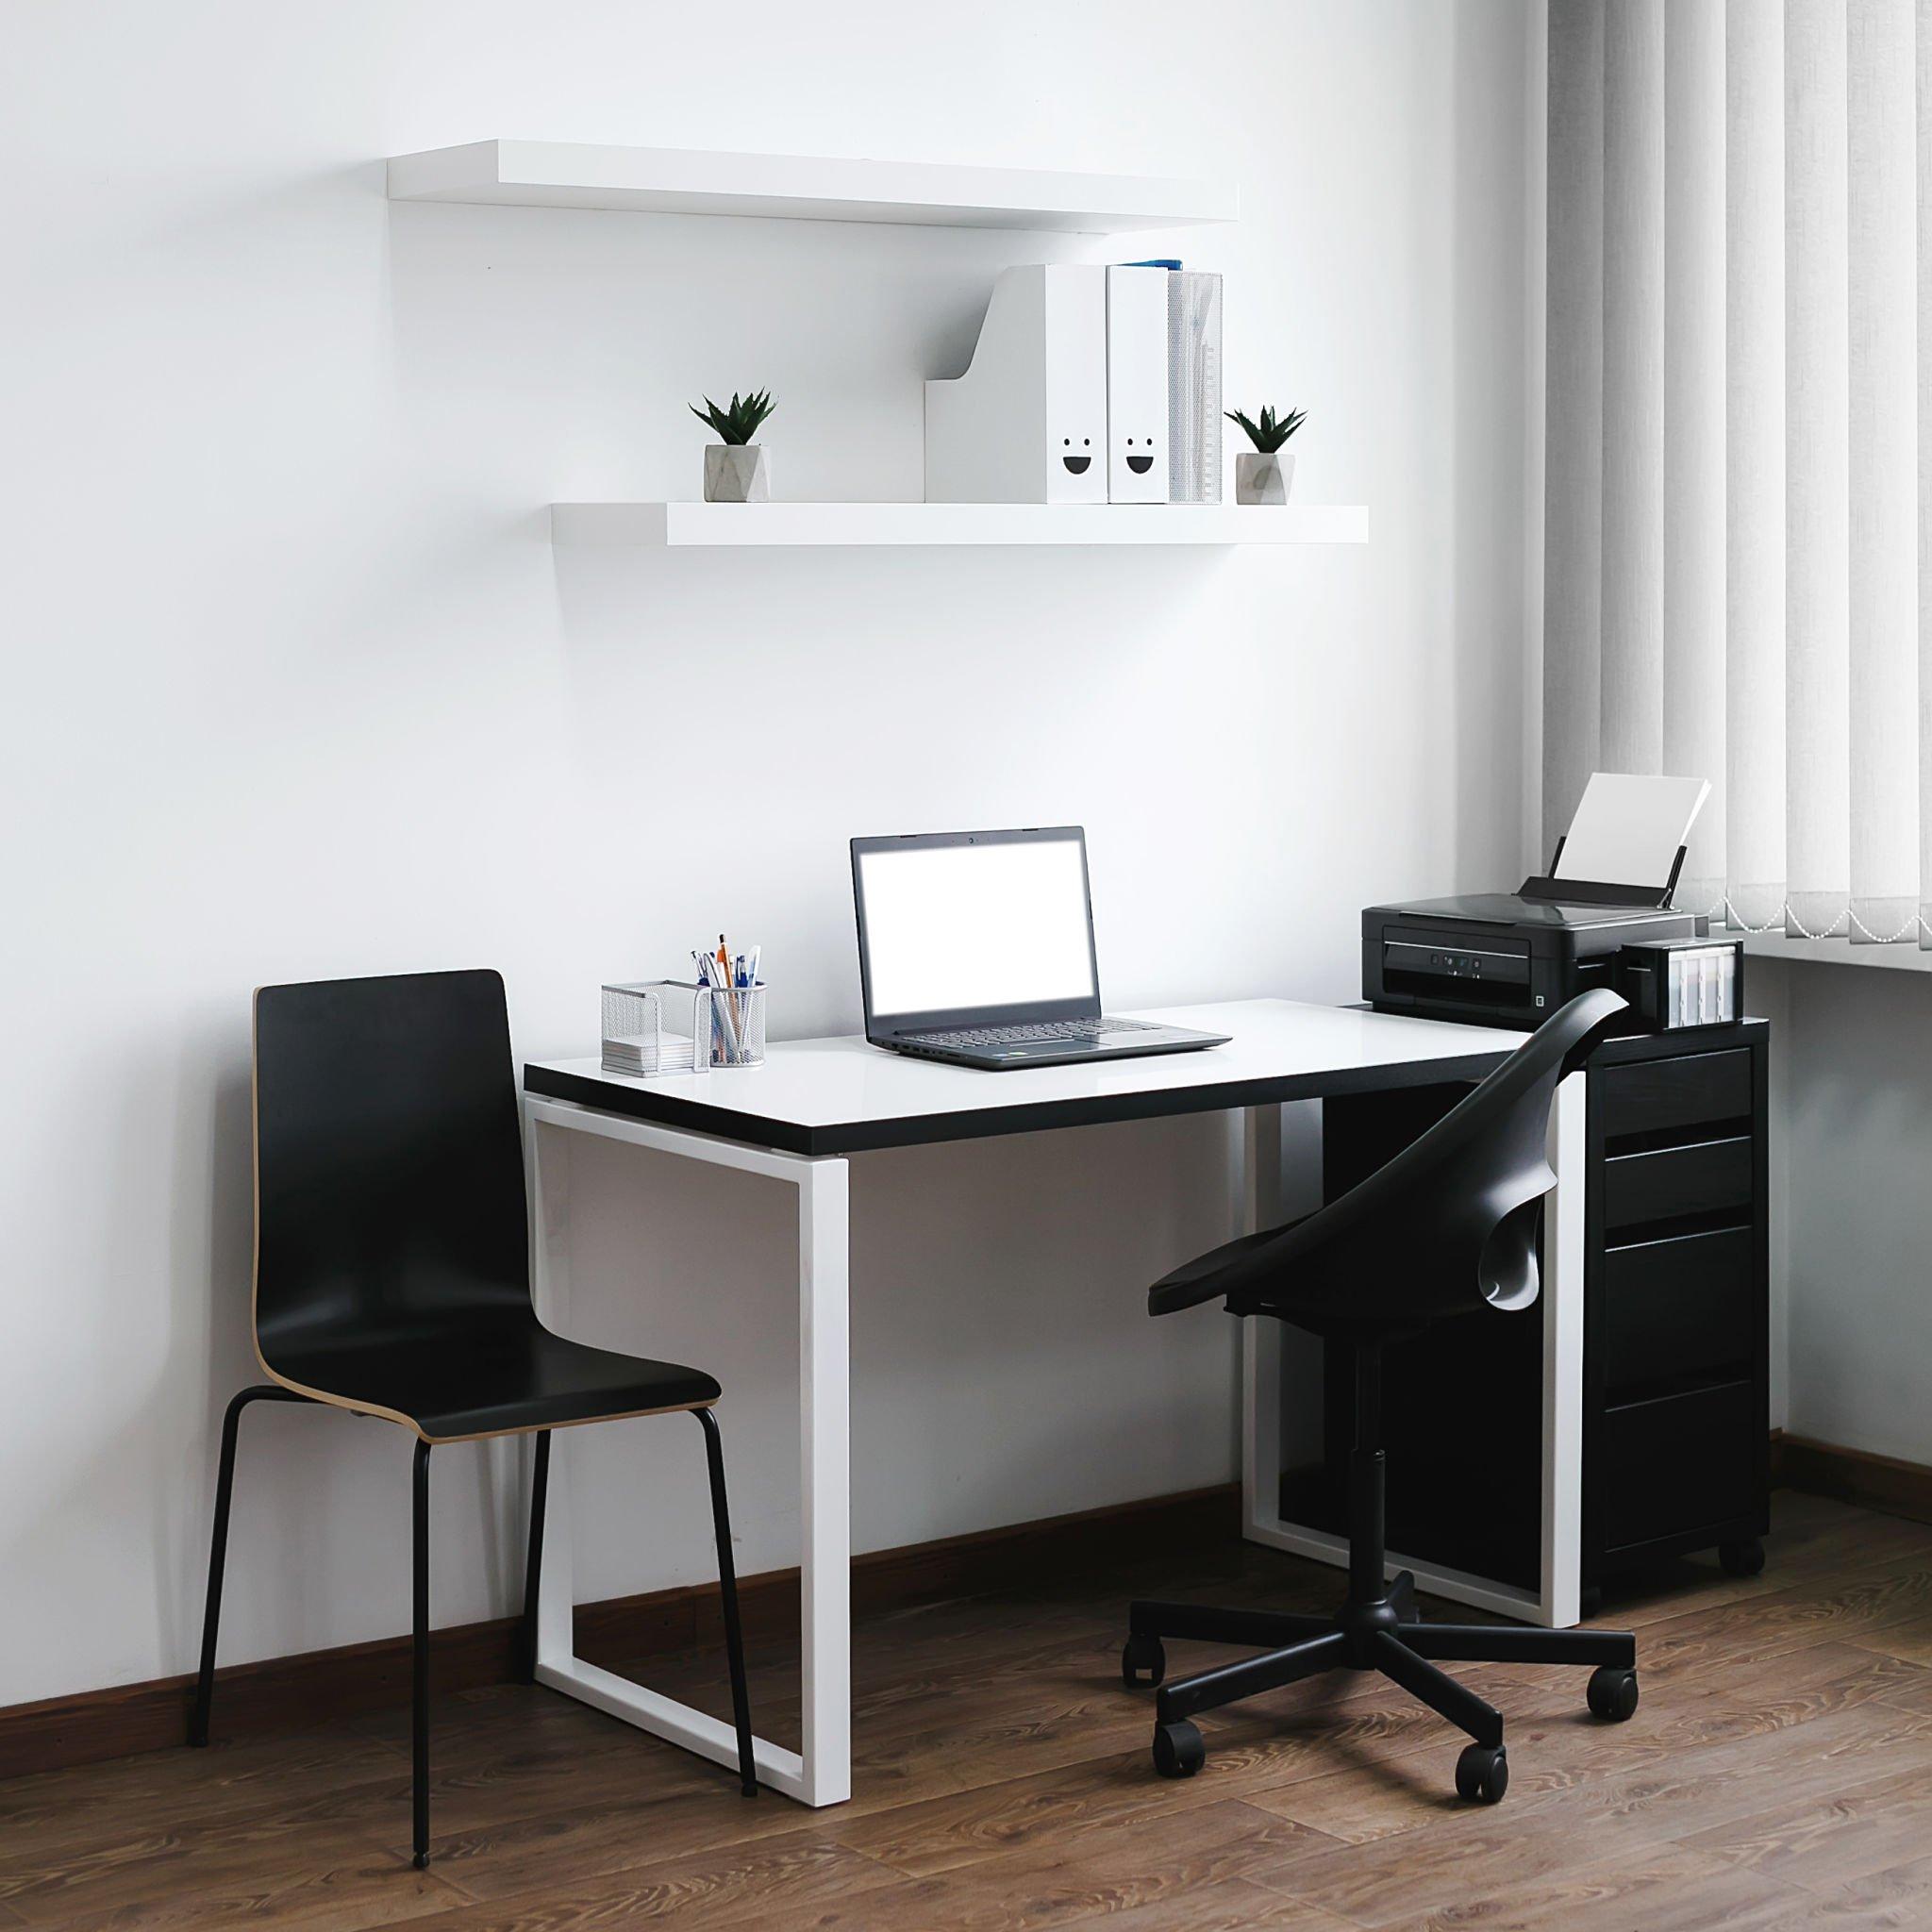 How to Create a Comfortable Space to Work Efficiently at Home